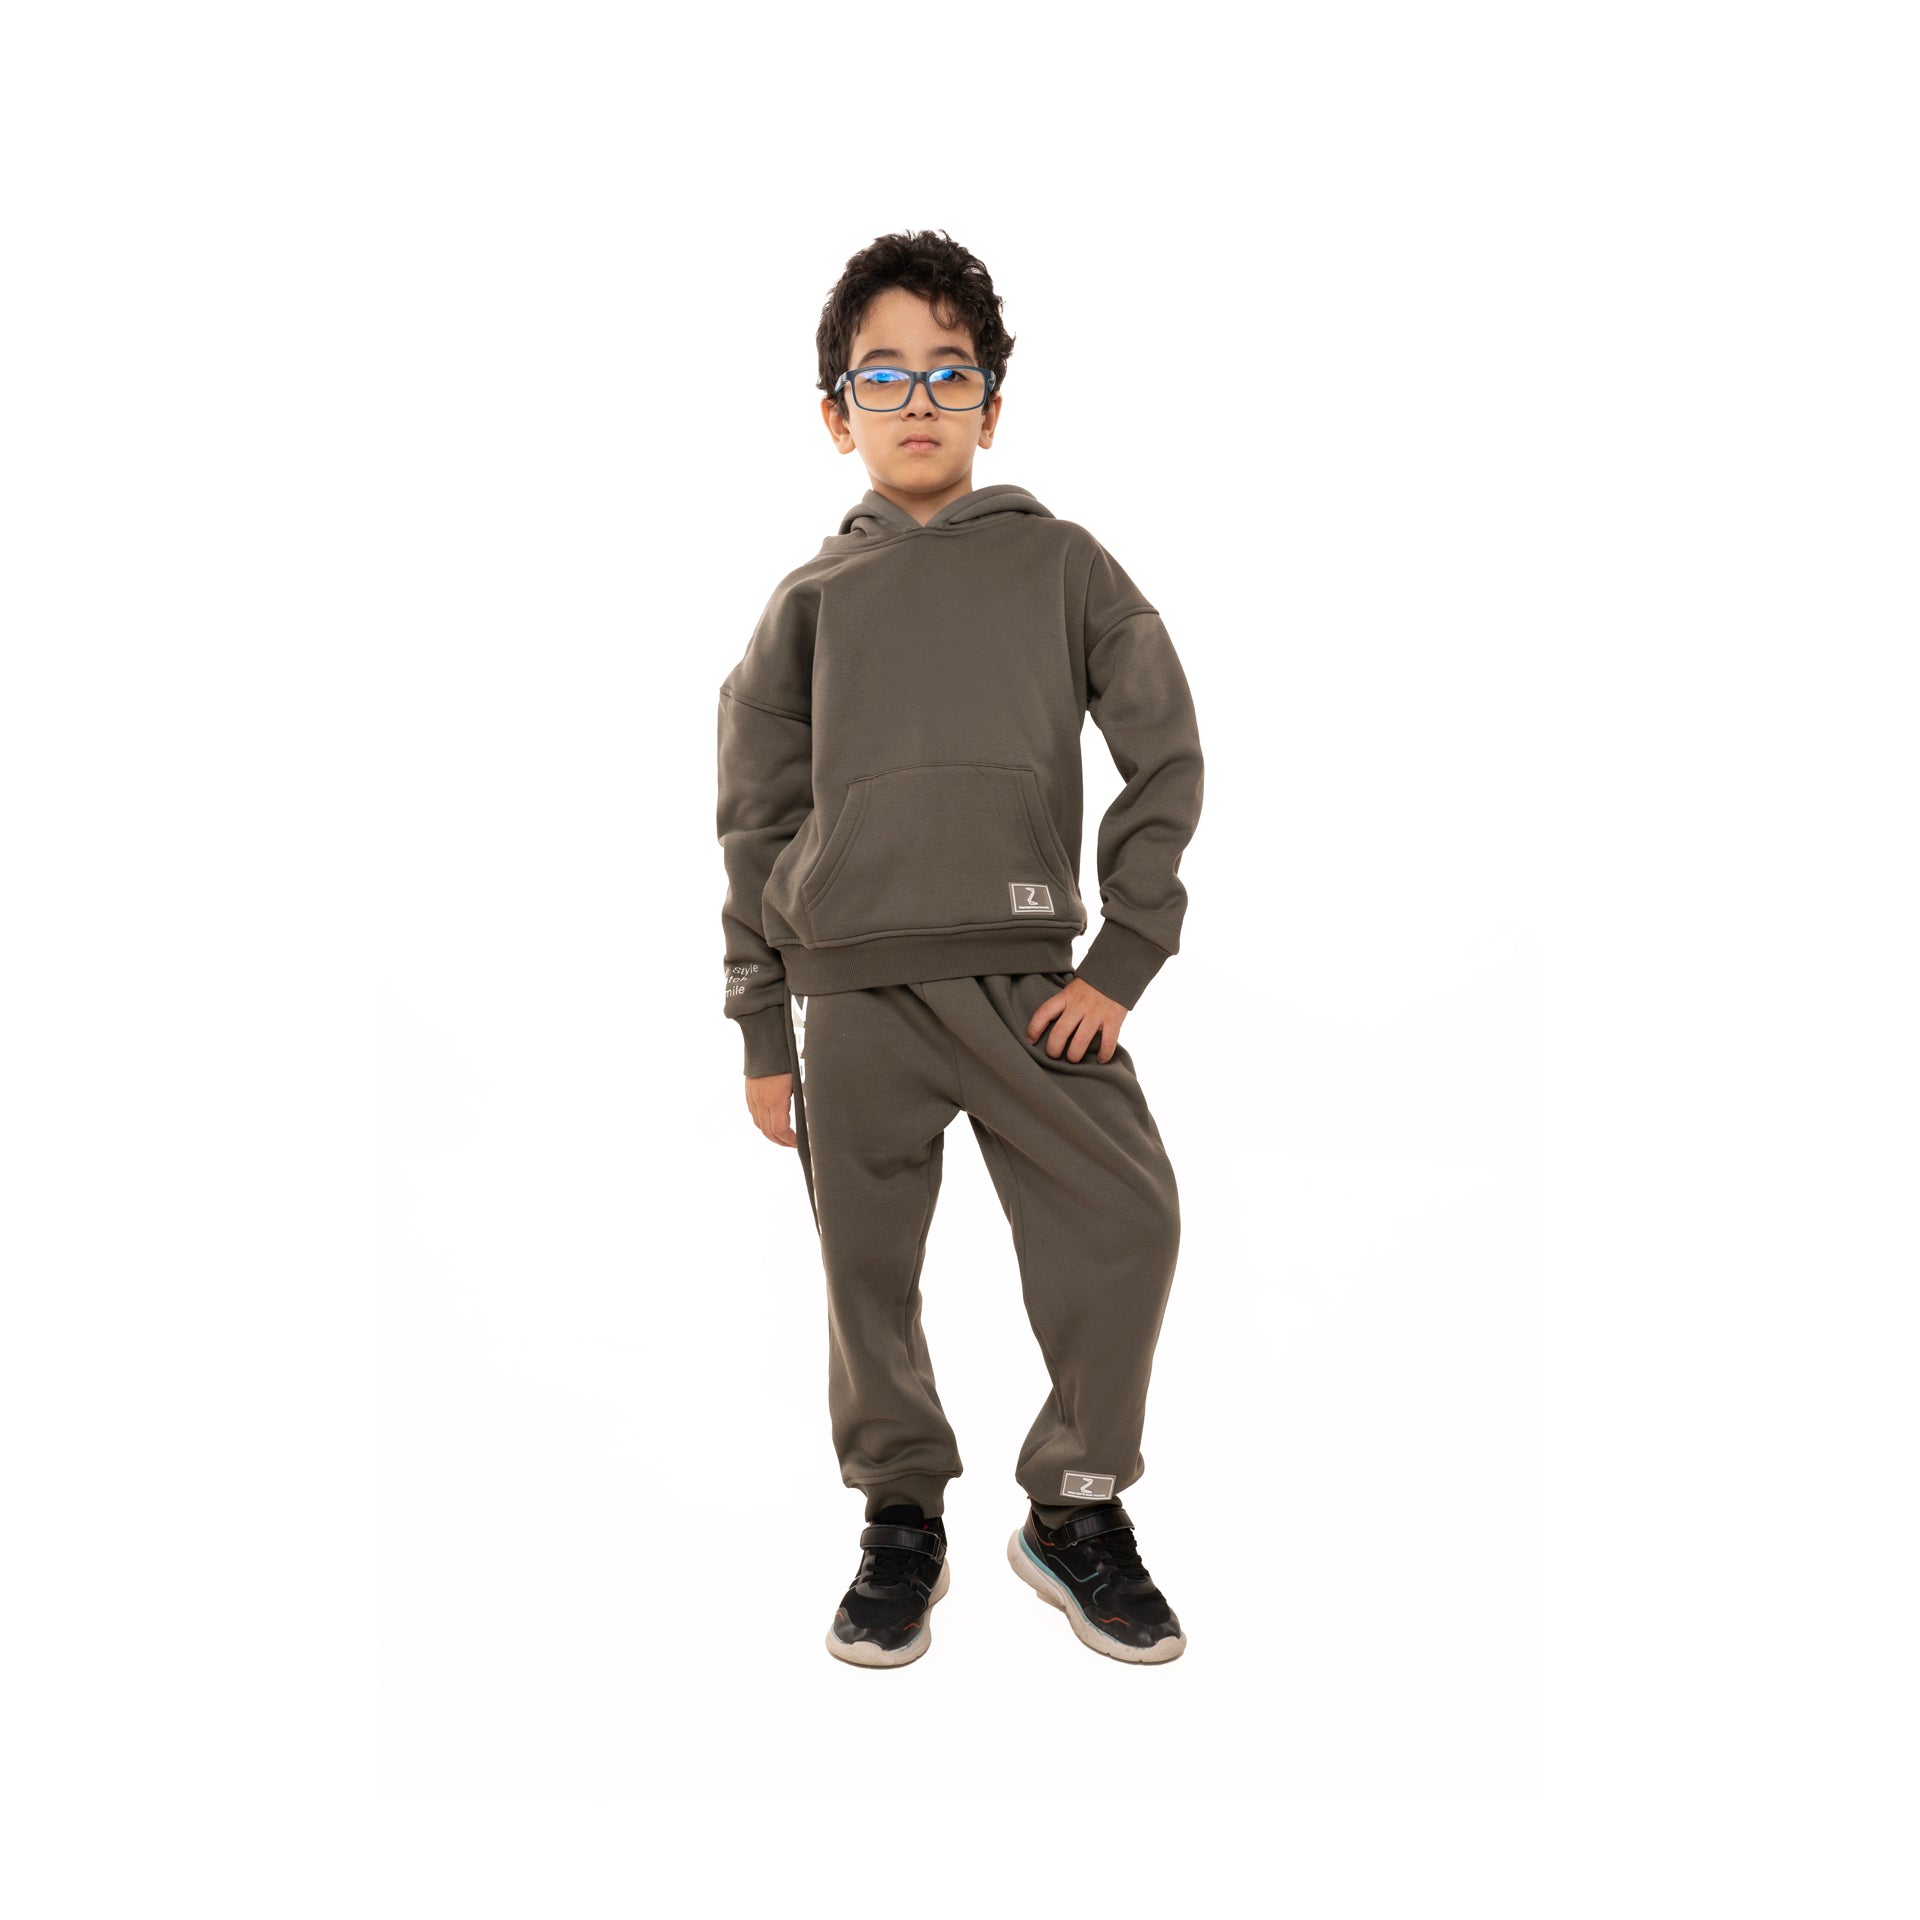 kids¬†set Gray hoodie and pants From Z Brand